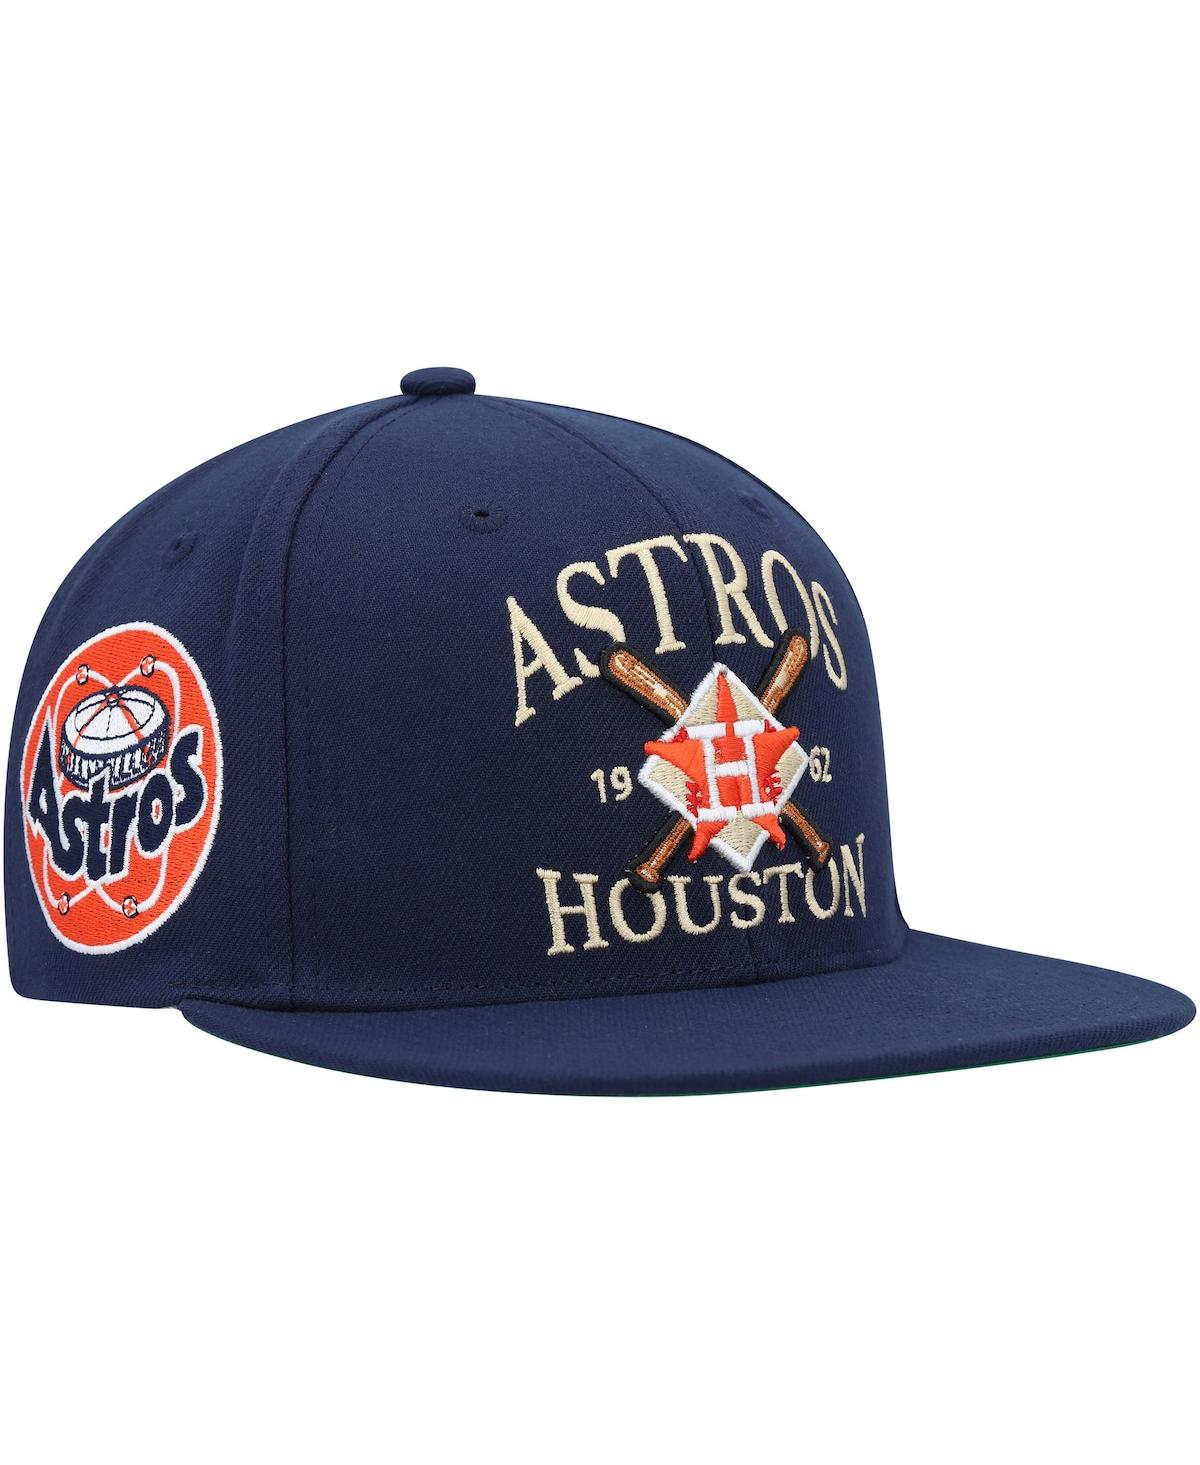 Lids Houston Astros Mitchell & Ness Cooperstown Collection Washed